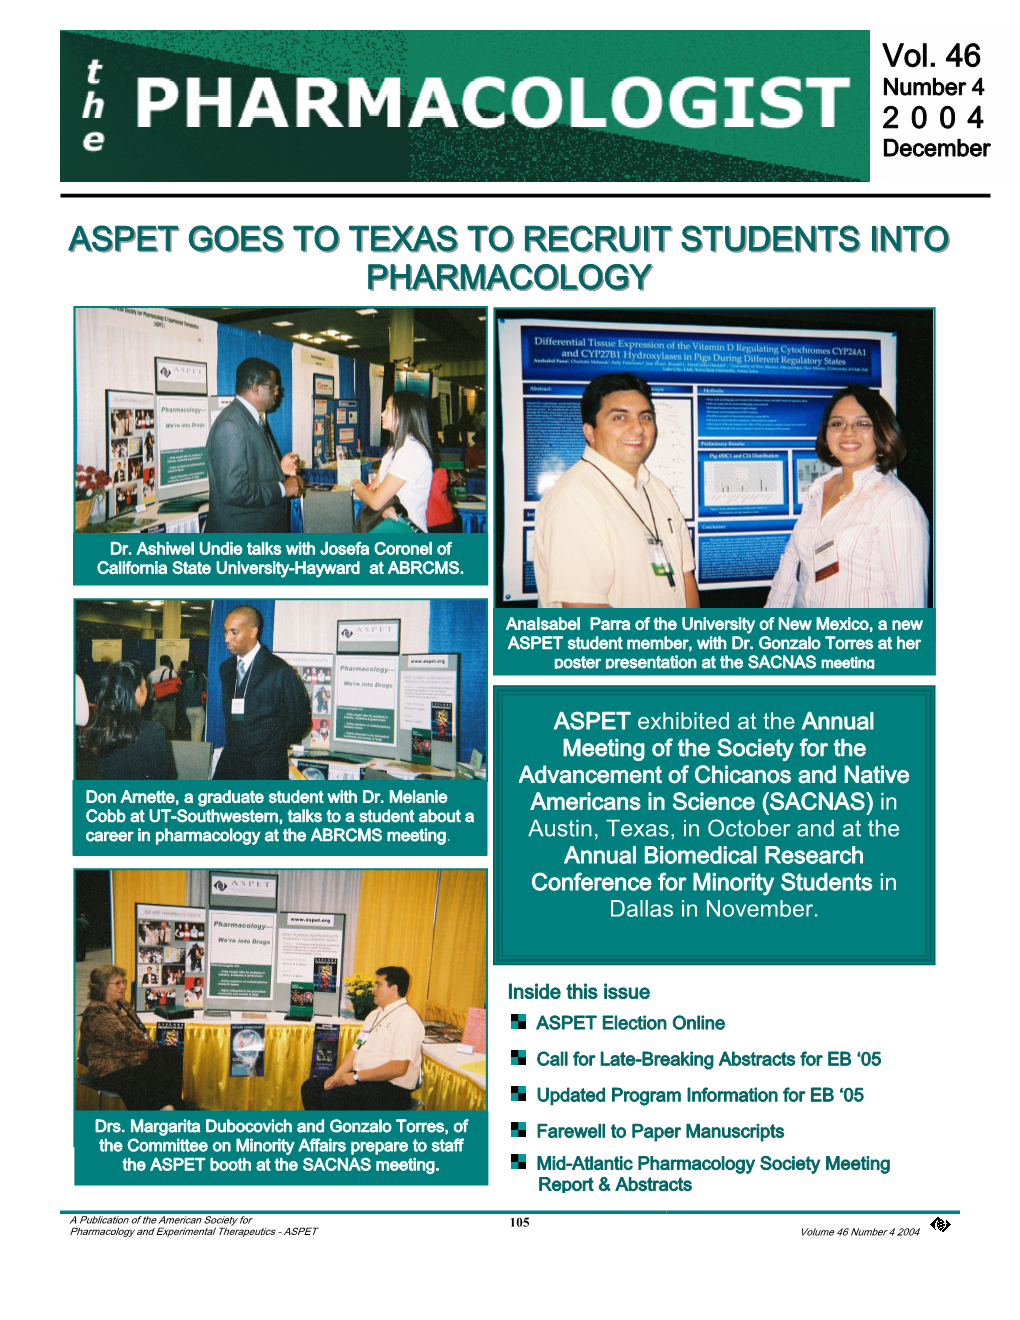 Aspet Goes to Texas to Recruit Students Into